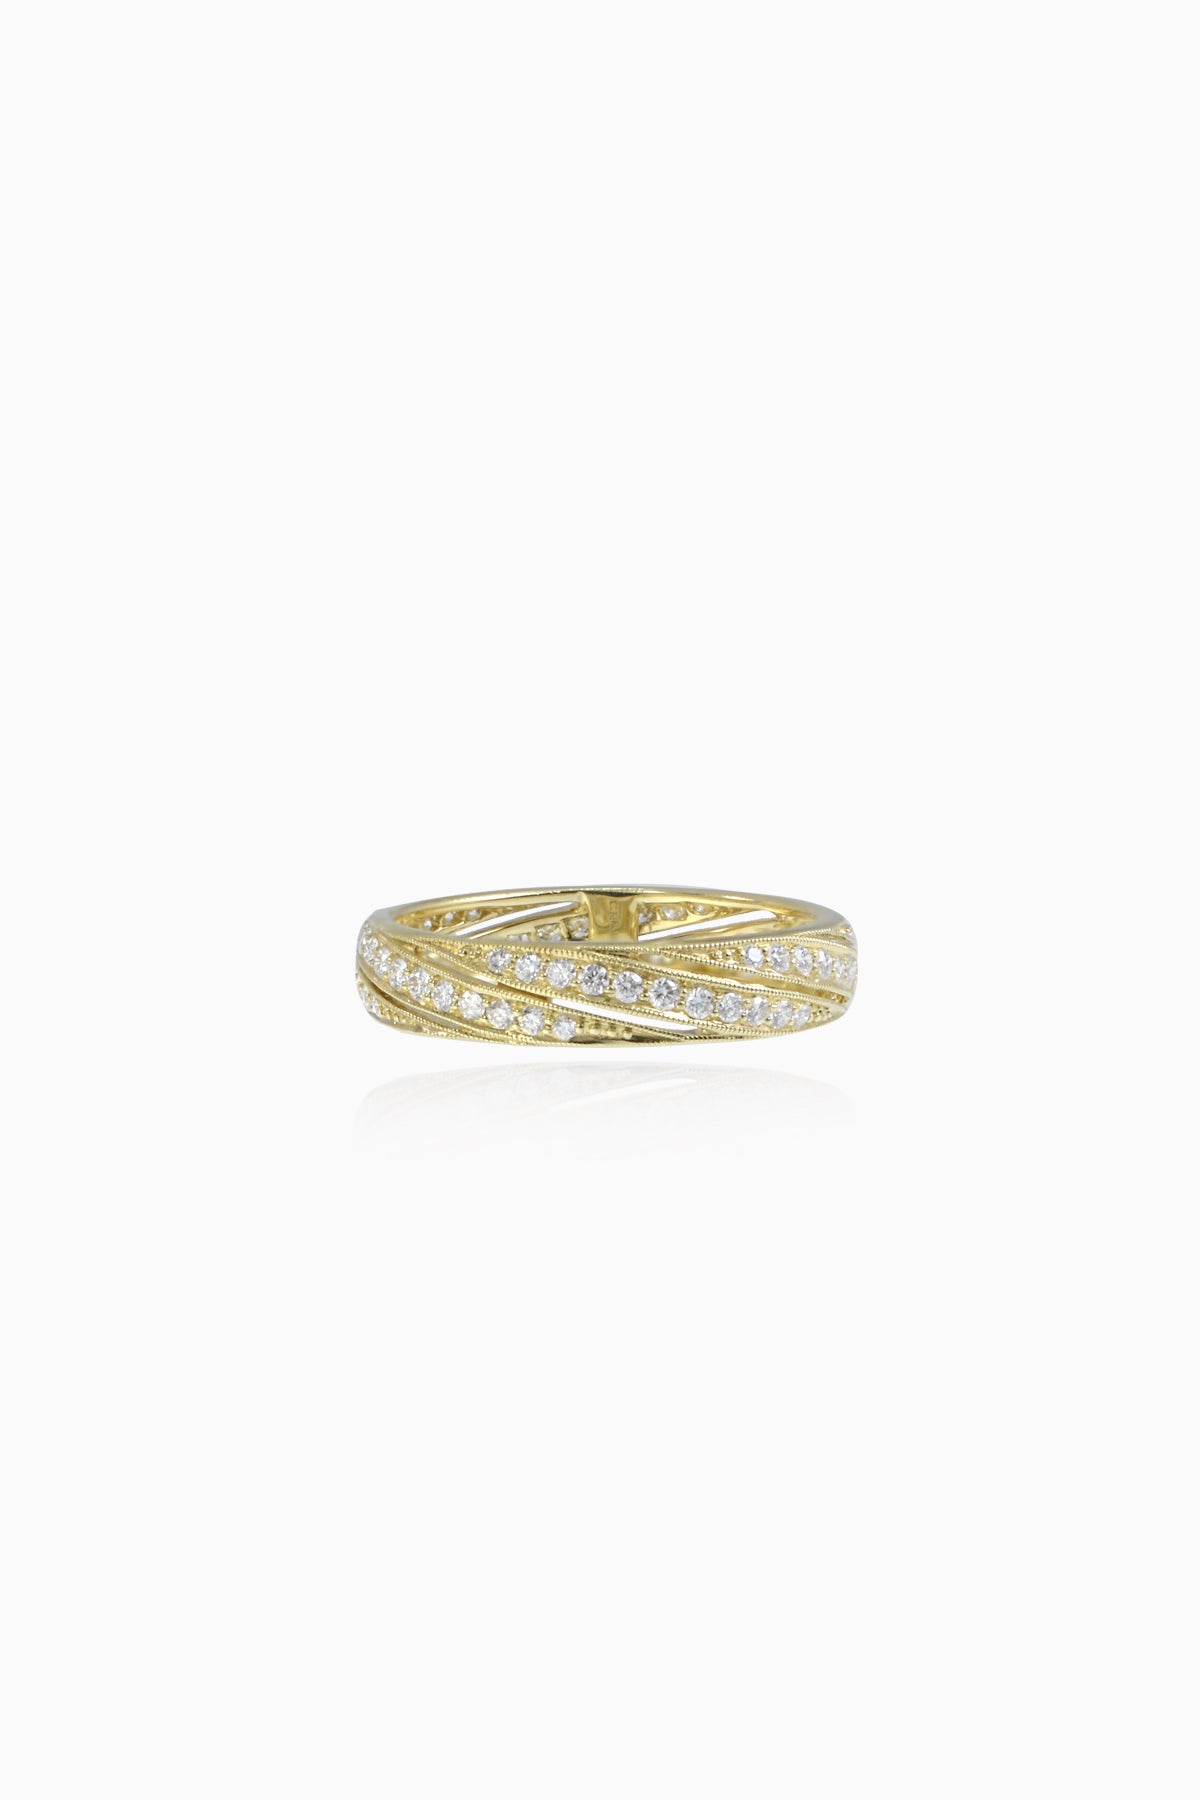 Ray of Light Band in Yellow Gold